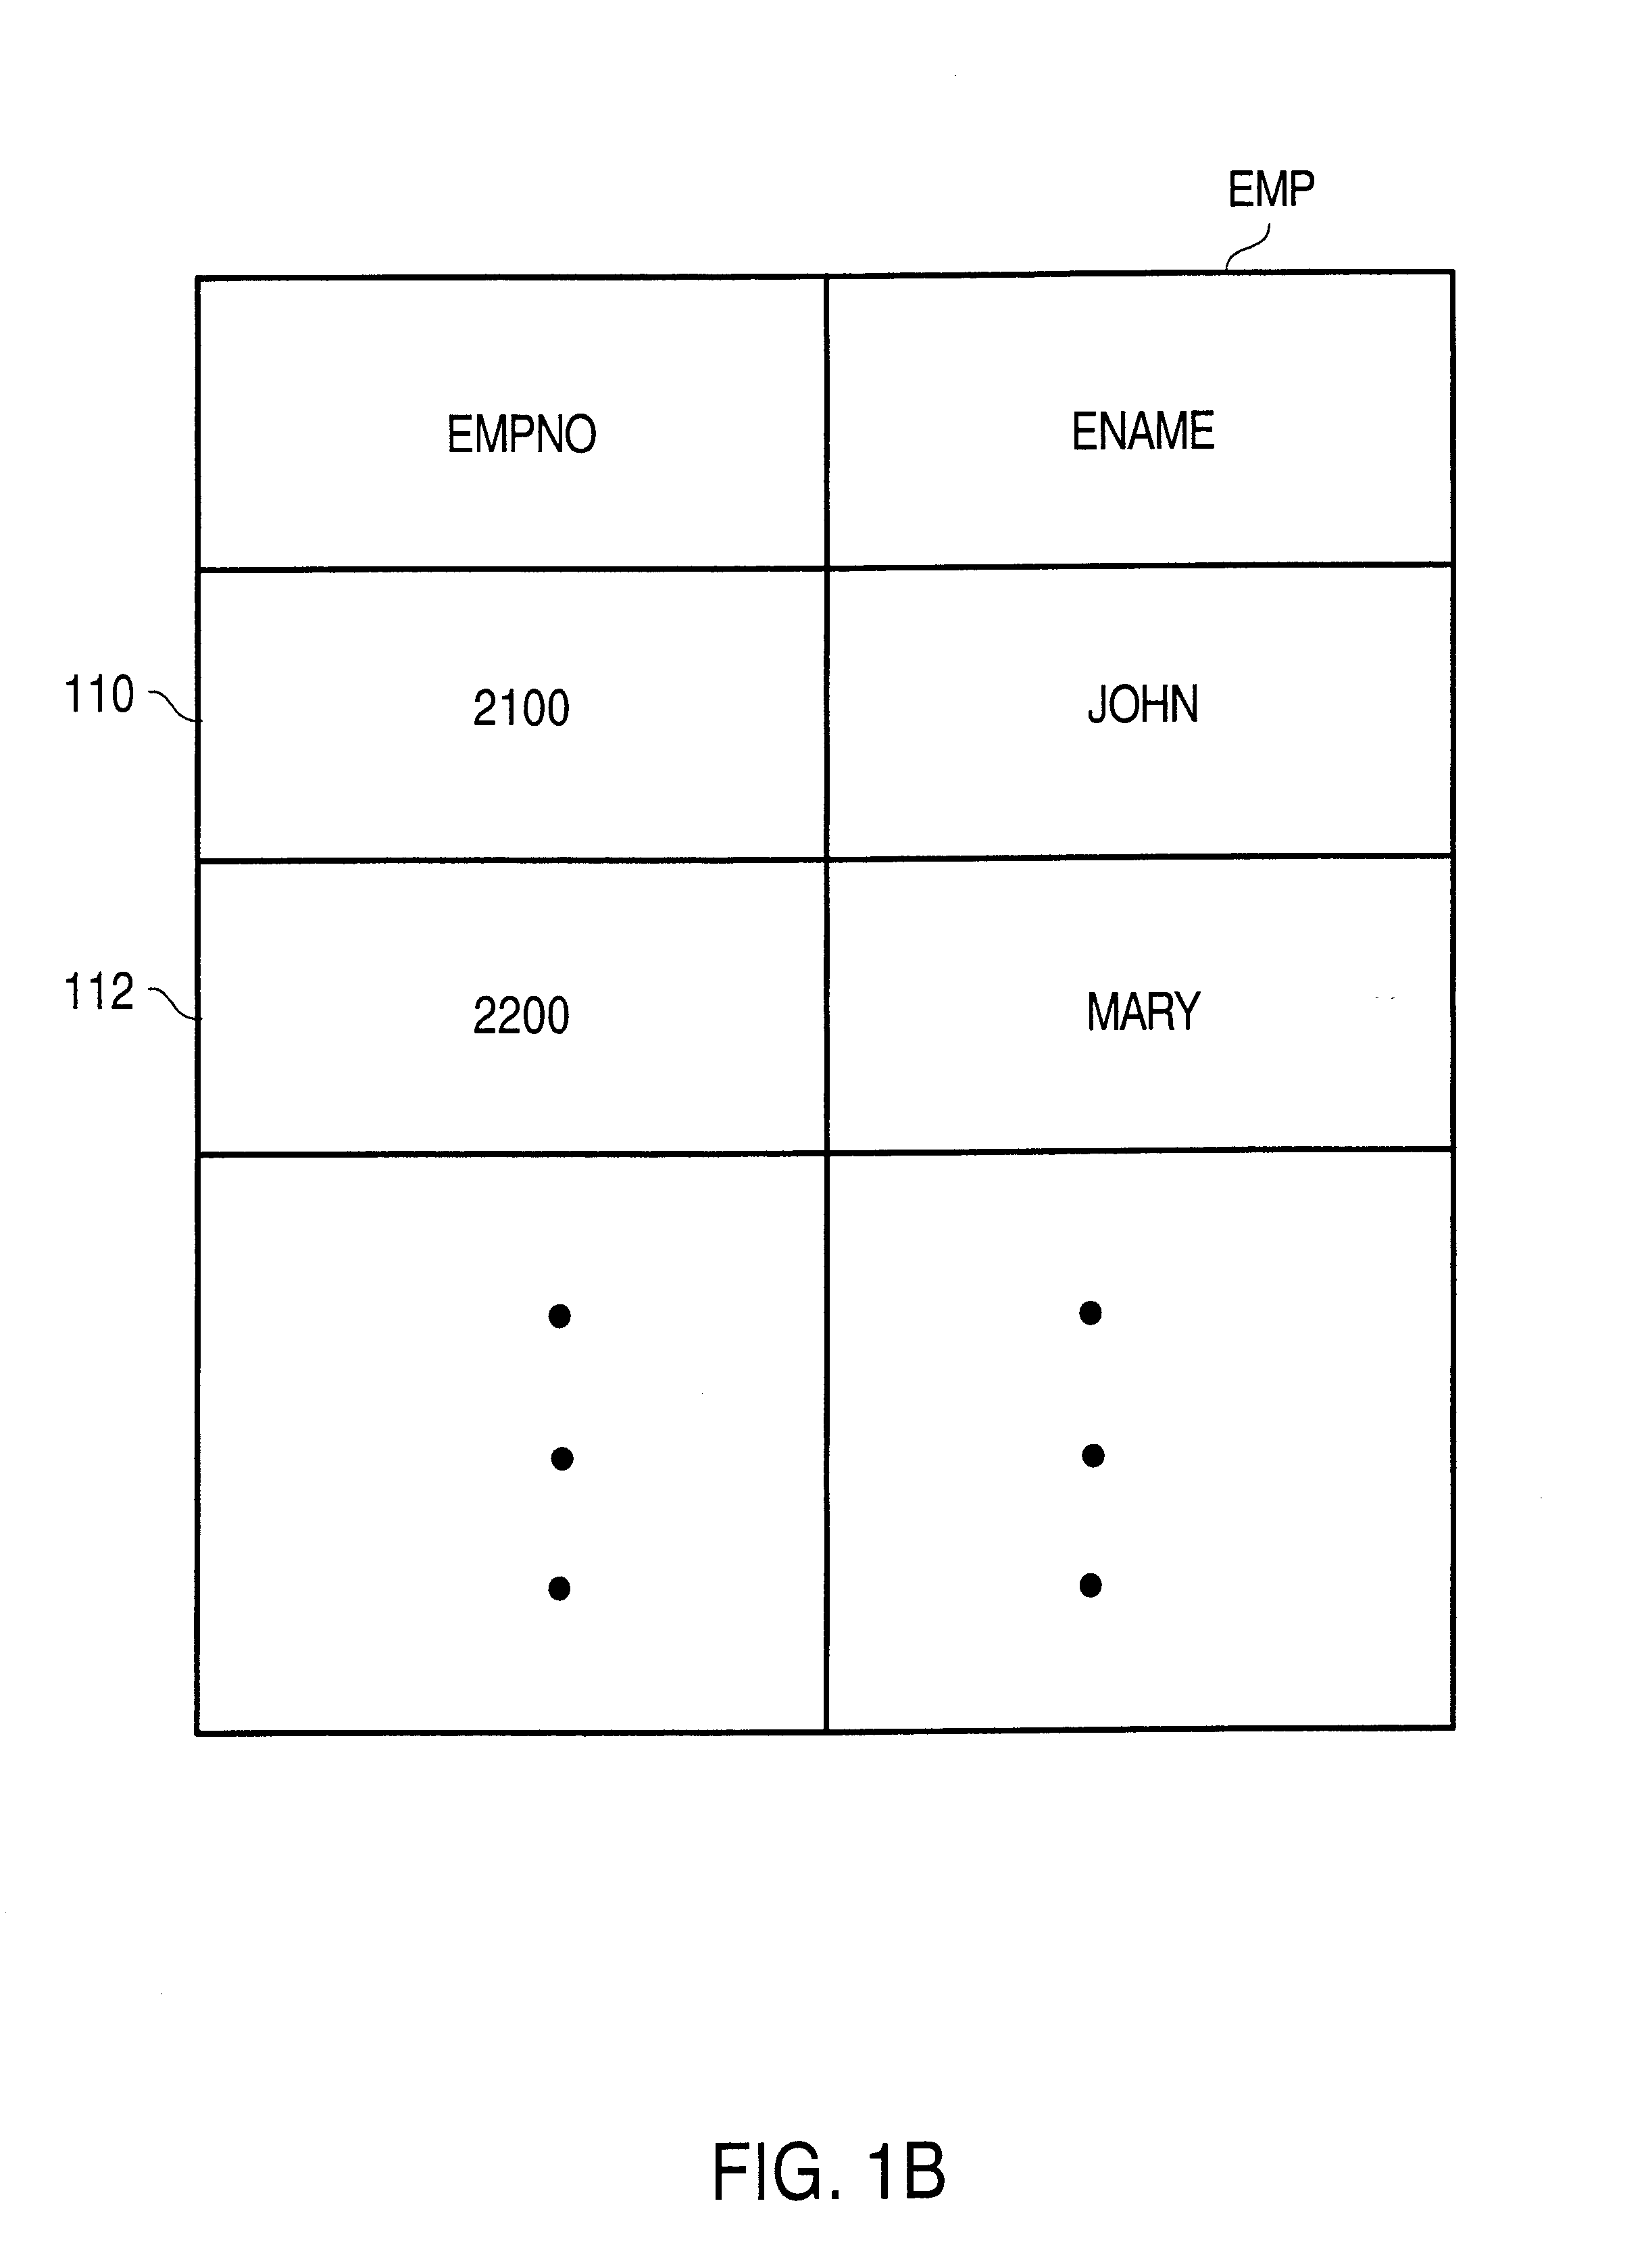 Apparatus and method for mapping relational data and metadata to XML